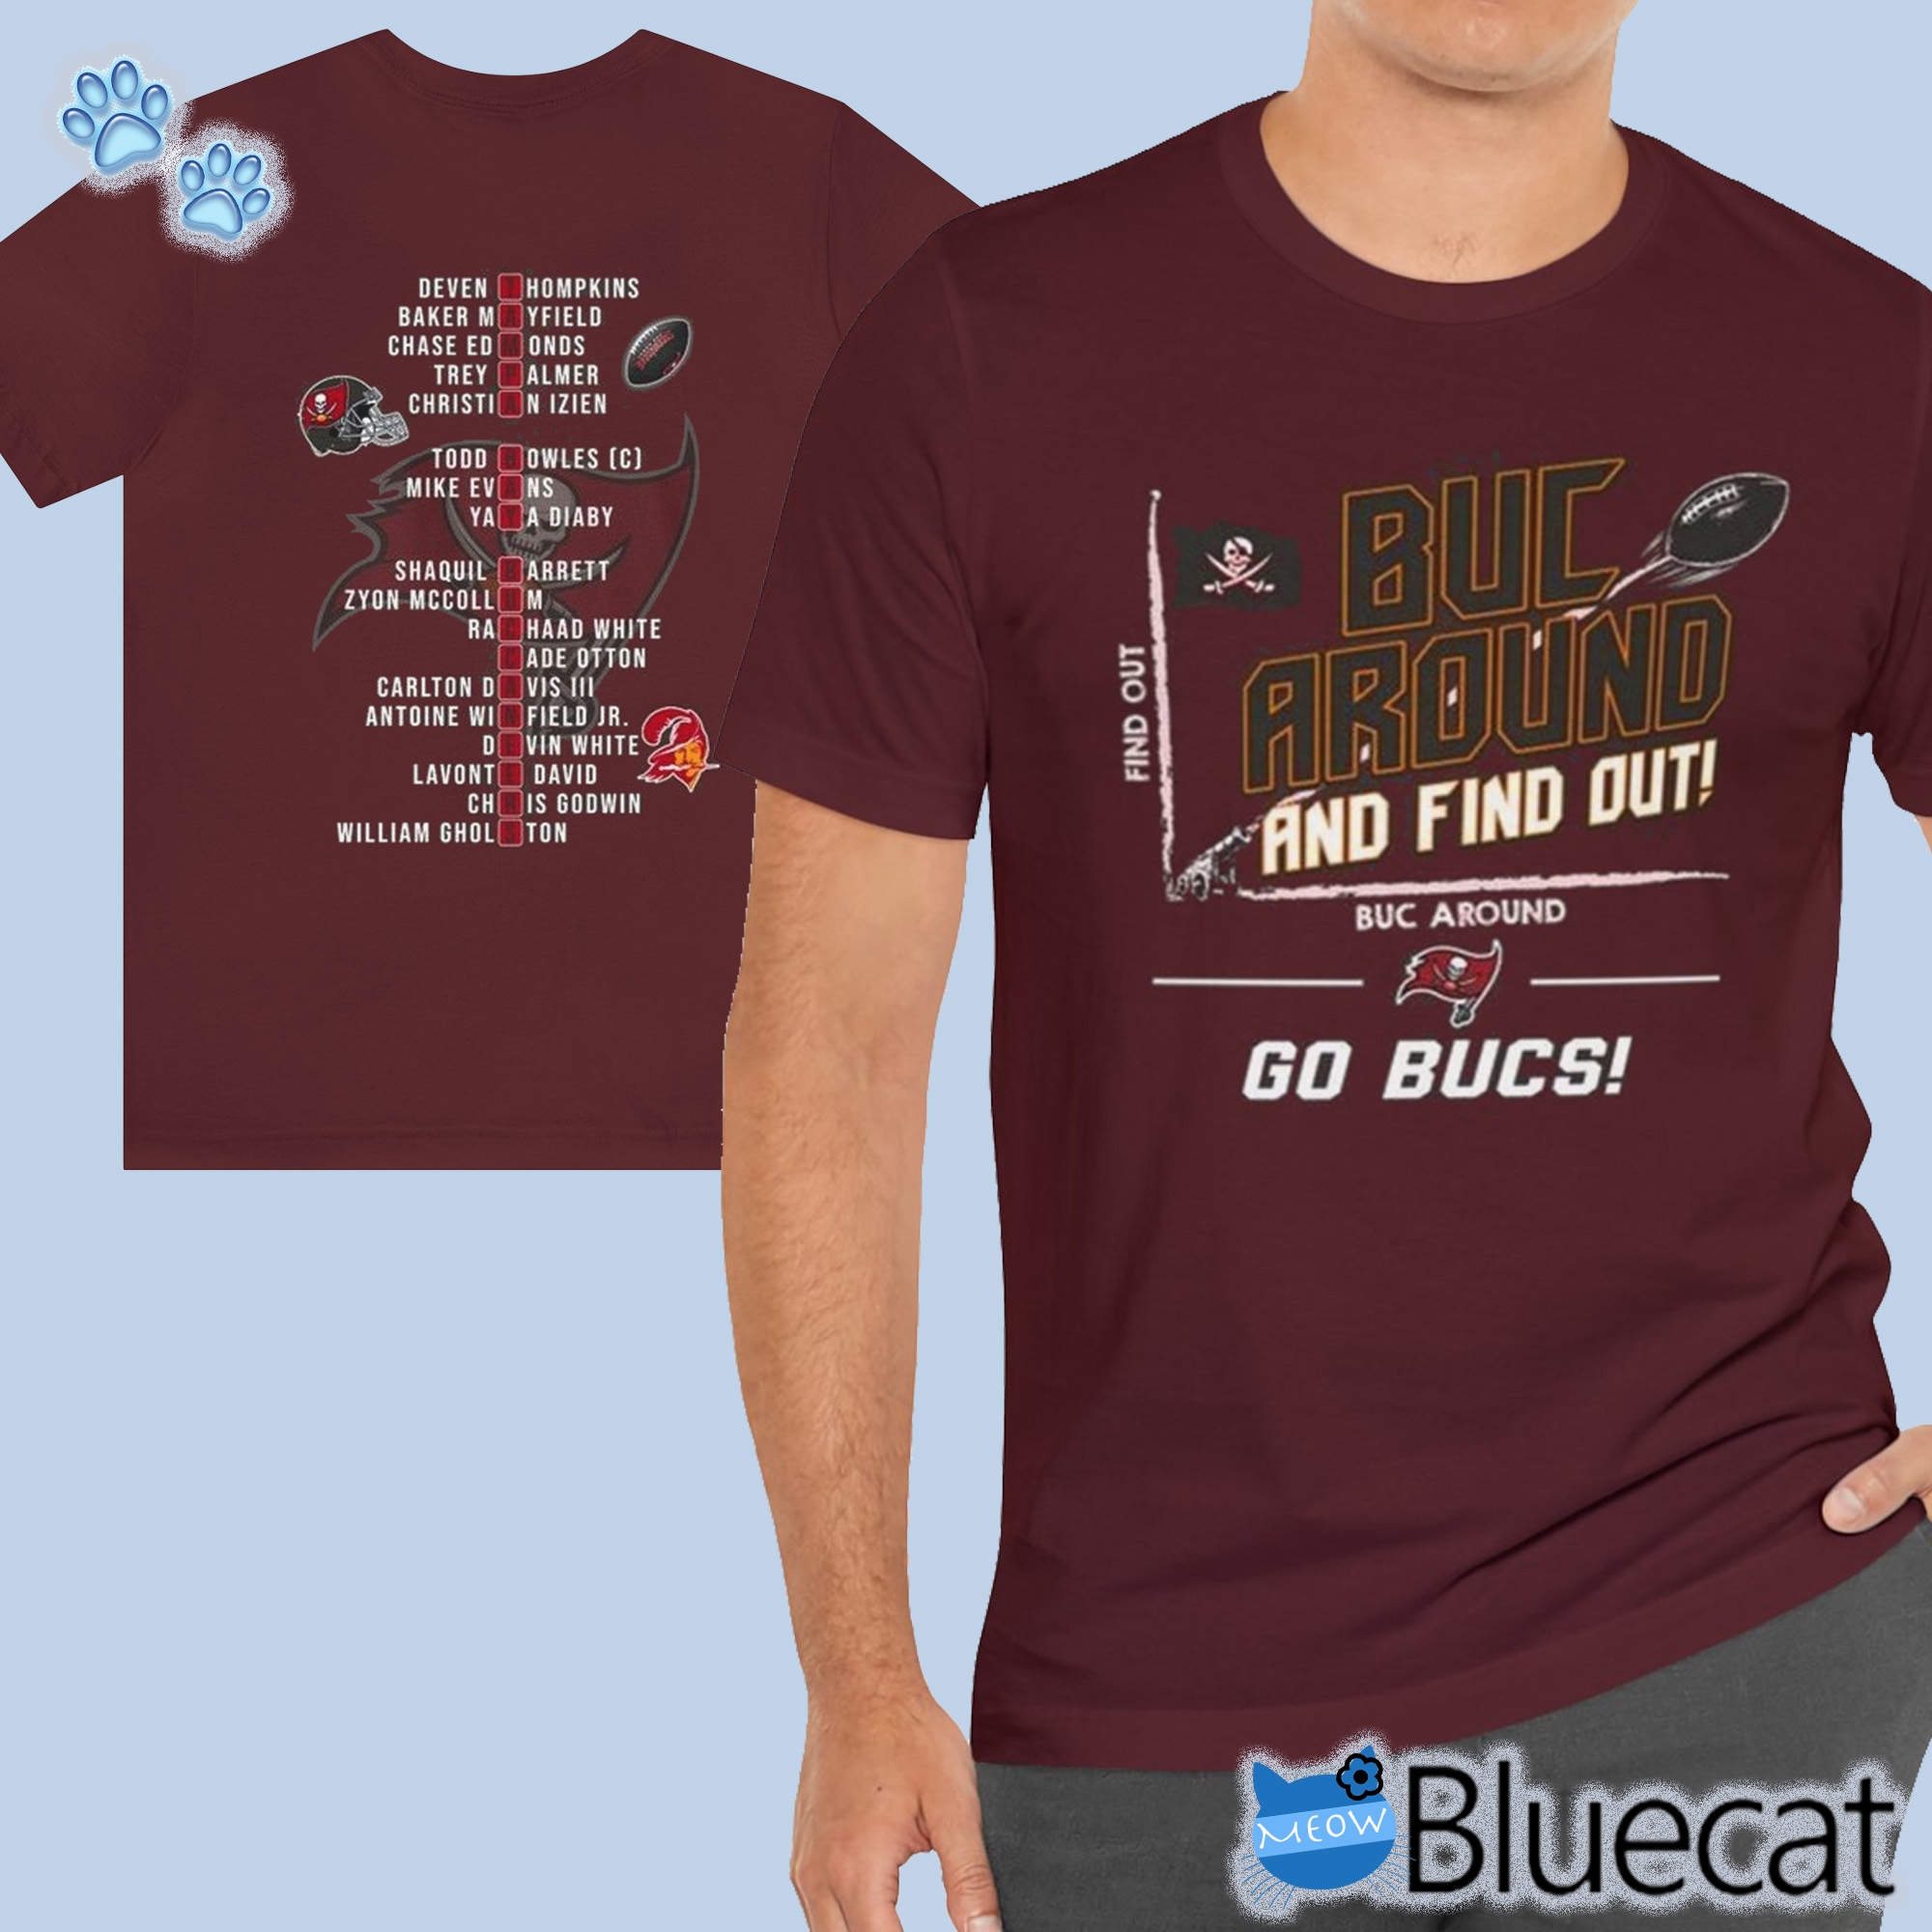 nfl tampa bay buccaneers buc around and find out go bucs t shirt sweatshirt 1 1